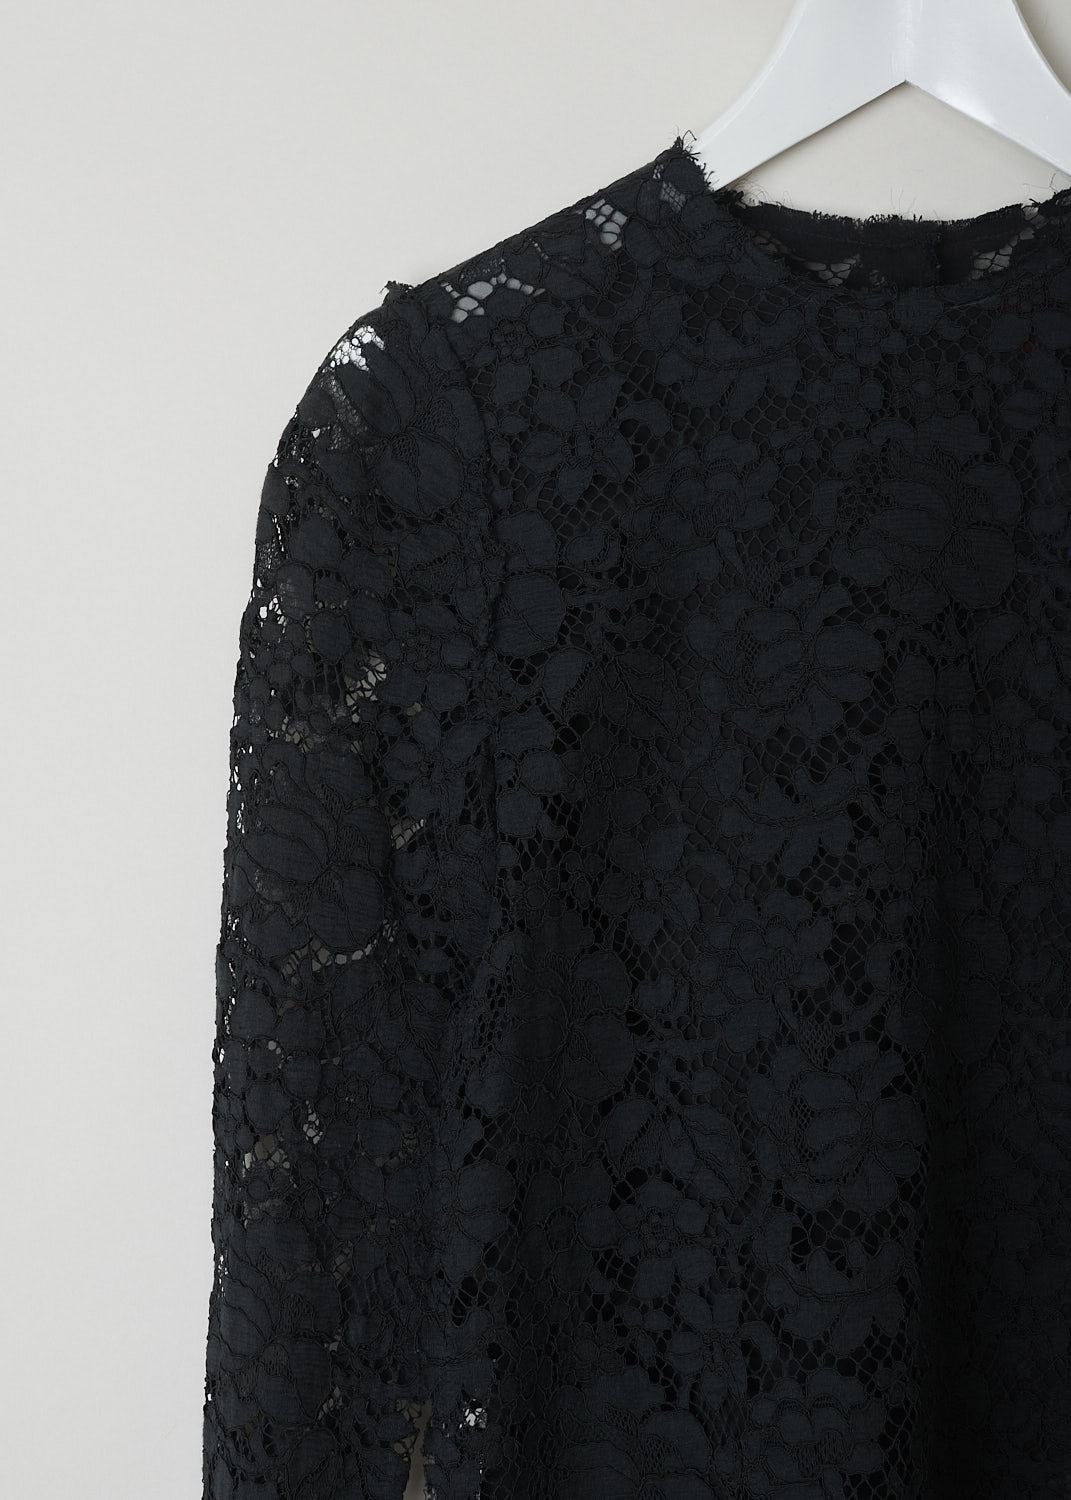 LANVIN, BLACK LACE TOP, W060771468C5B_NOIR, Black, Detail, This black lace top with black silk lining has a round neckline with a raw finish. In the back of the neck, a concealed snap button functions as the closure option.  The long sleeves have zipped cuffs. The straight hemline also has a raw finish.
